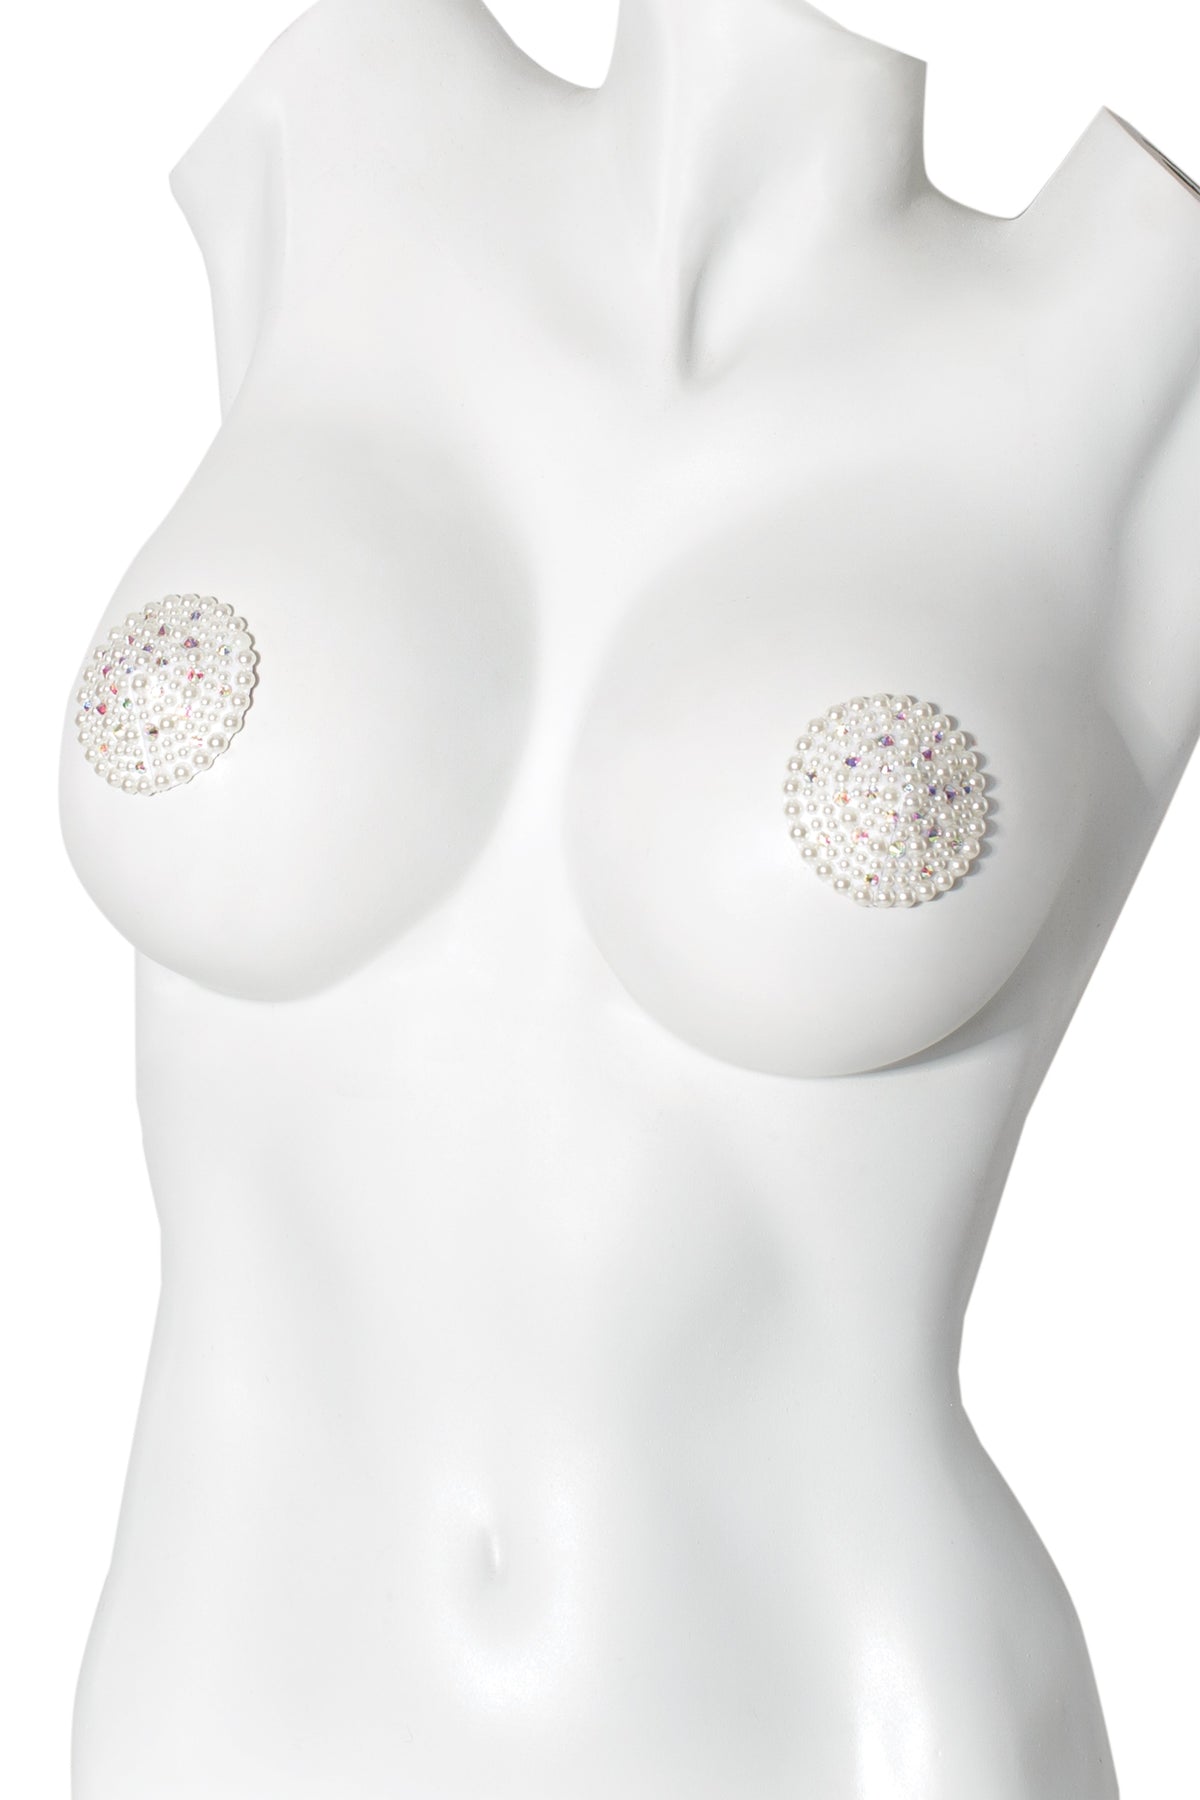 Pearl Round Pasties - Model Express Vancouver